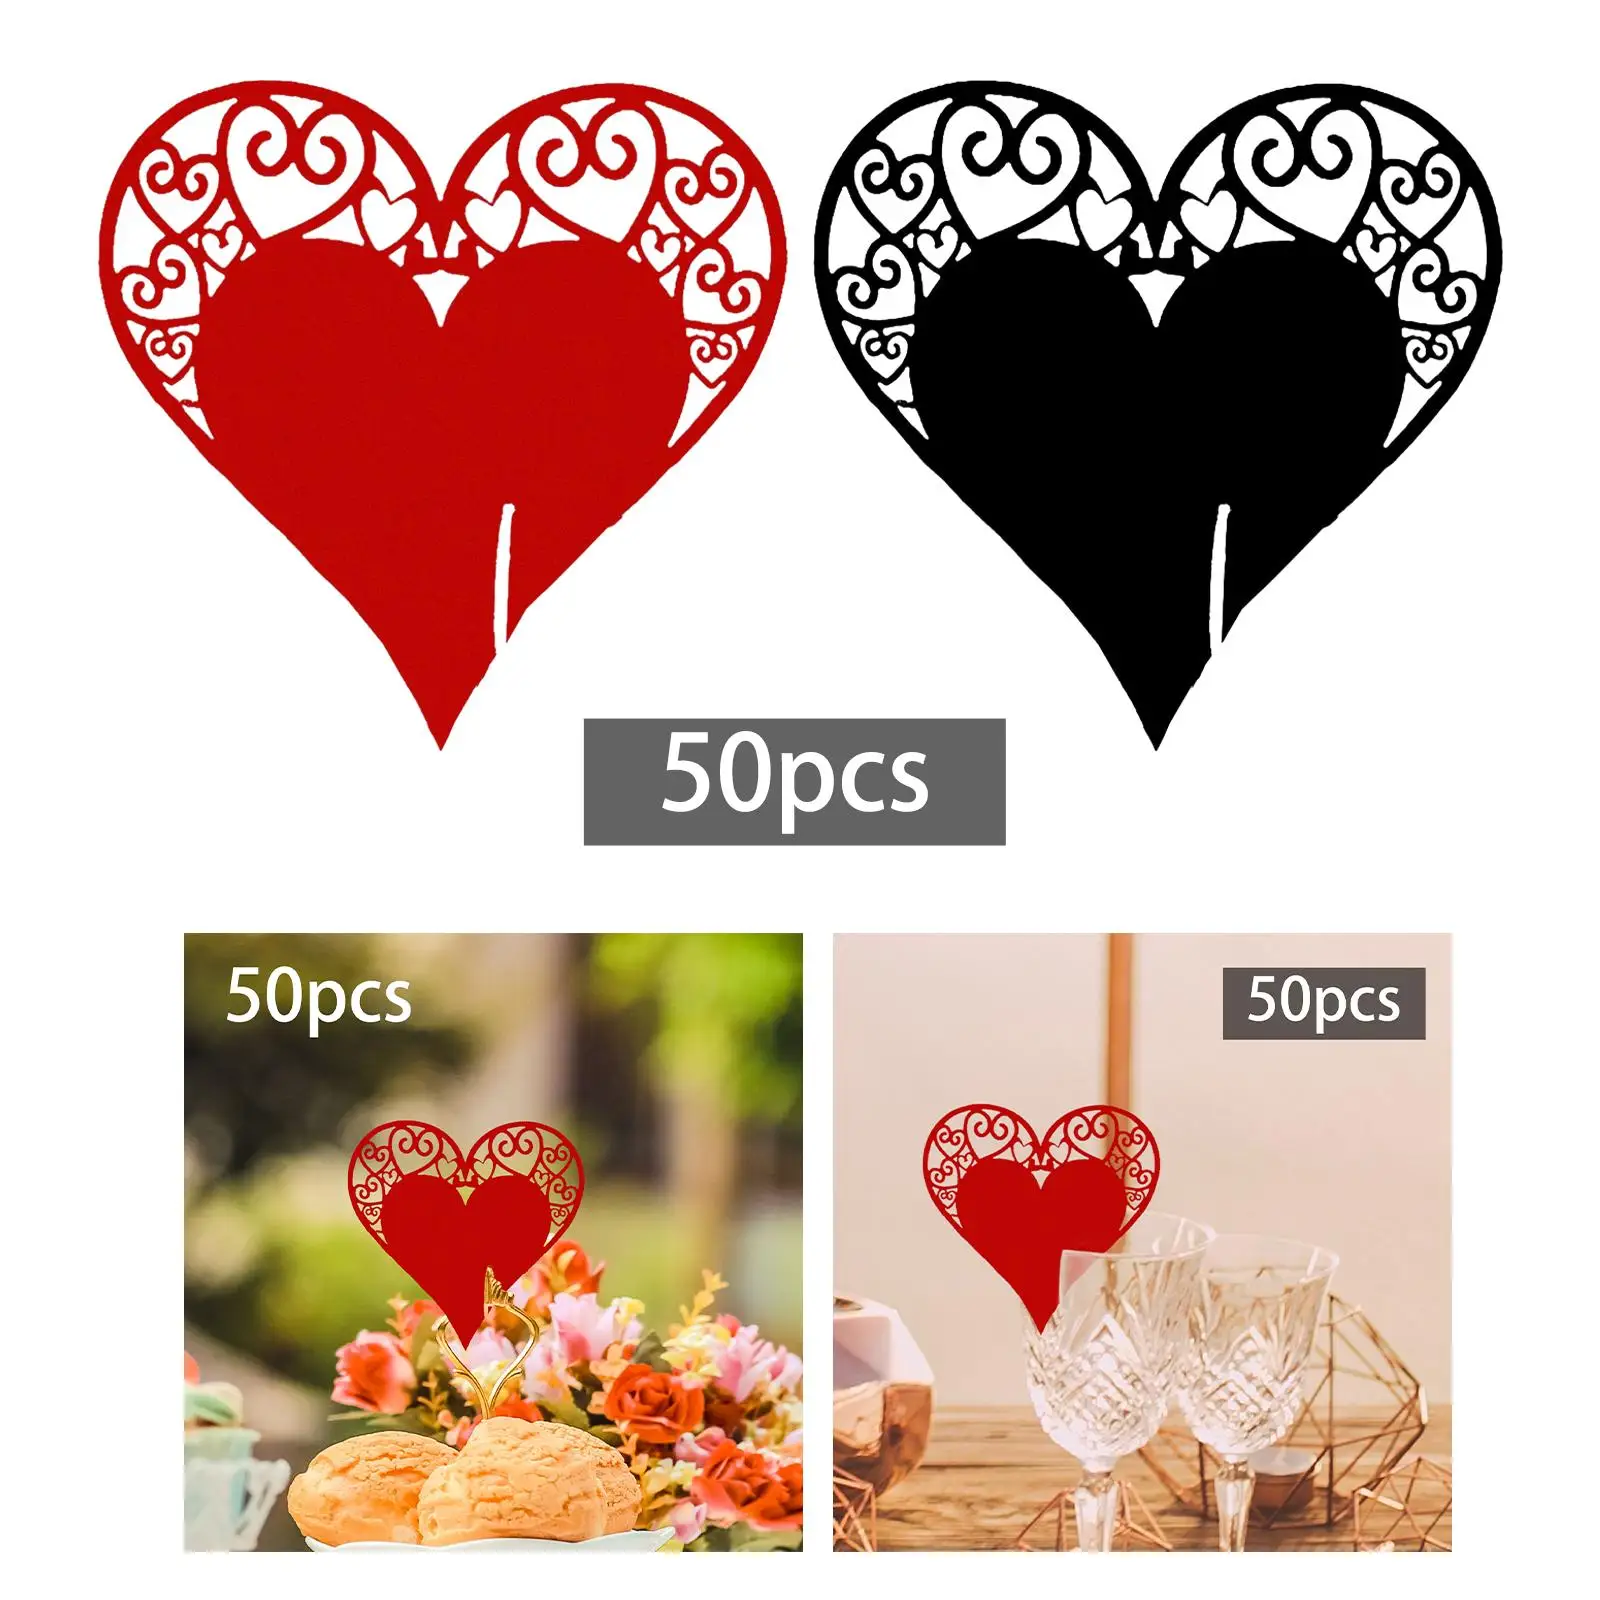 50 Pieces Heart Shape Paper Place Cards Greeting Cards Wine Glass Place Cards for Restaurant Wedding Parties Dinner Birthday